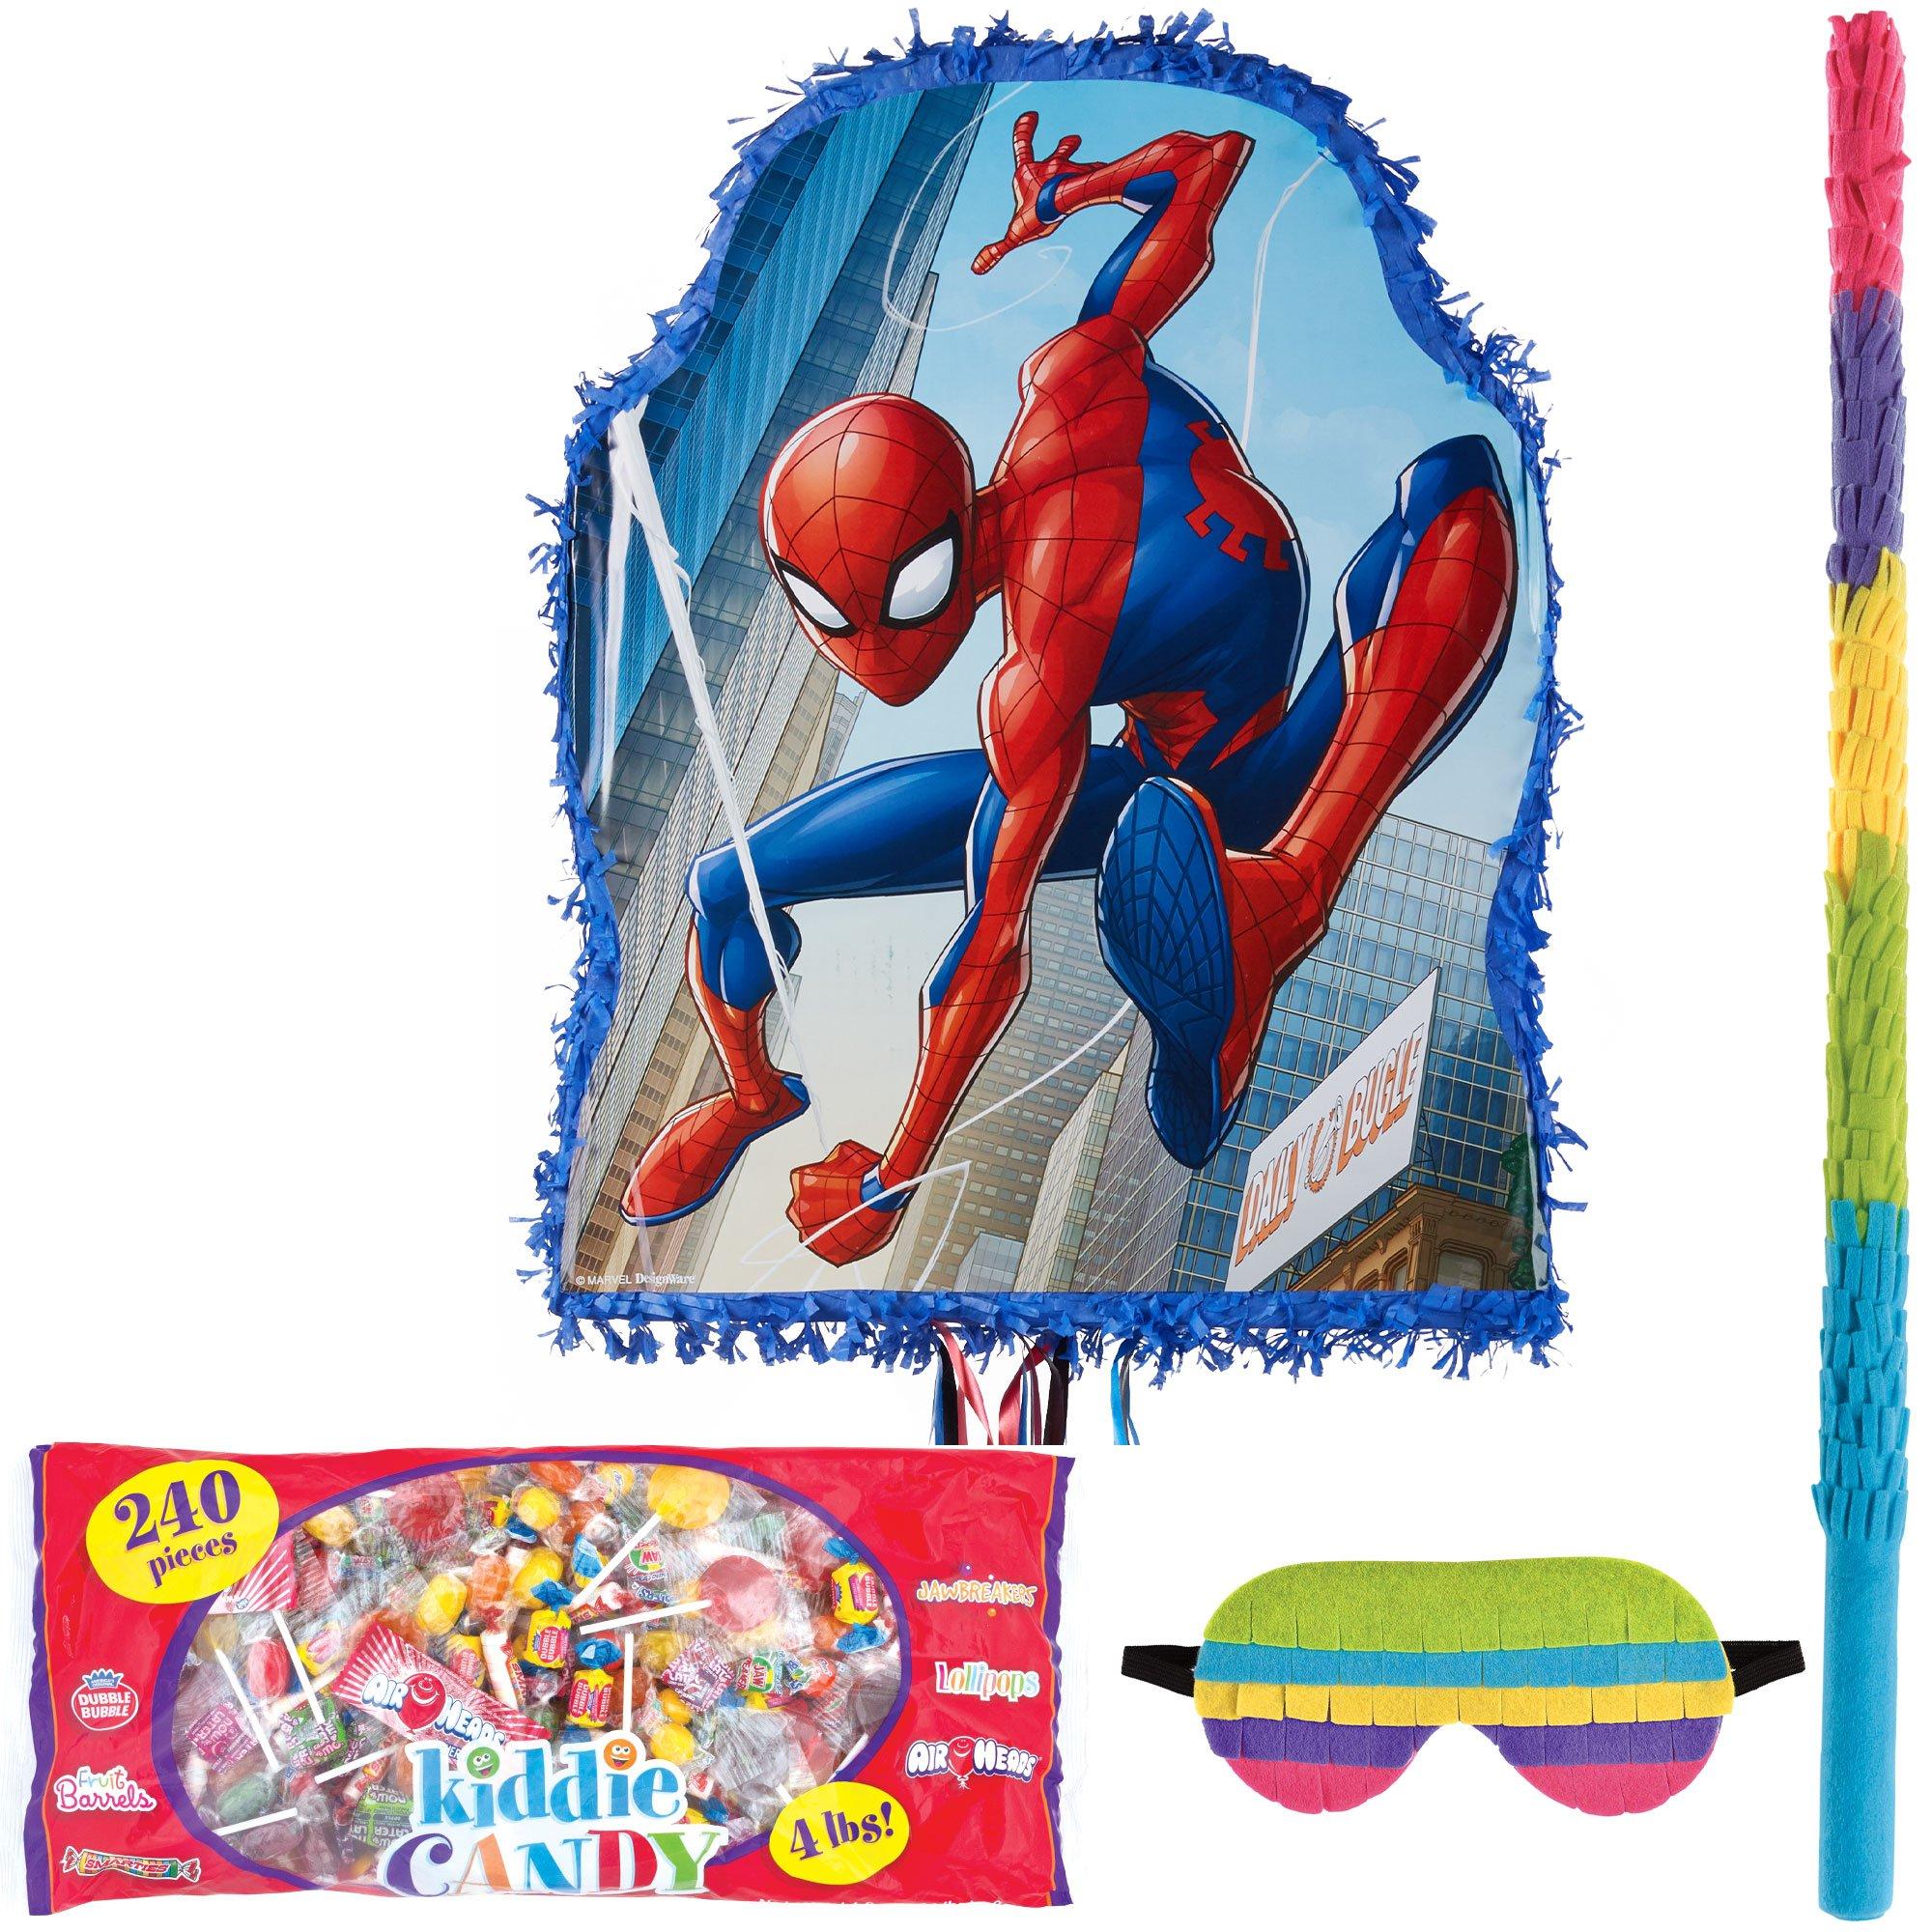  Spiderman 3D Pull String Pinata - 17 x 14 (1 Pc.) - Easy to  Set-Up Birthday Decorations & Party Supplies - Perfect Fun Party Game for  Birthdays, Themed Parties, Baby Showers